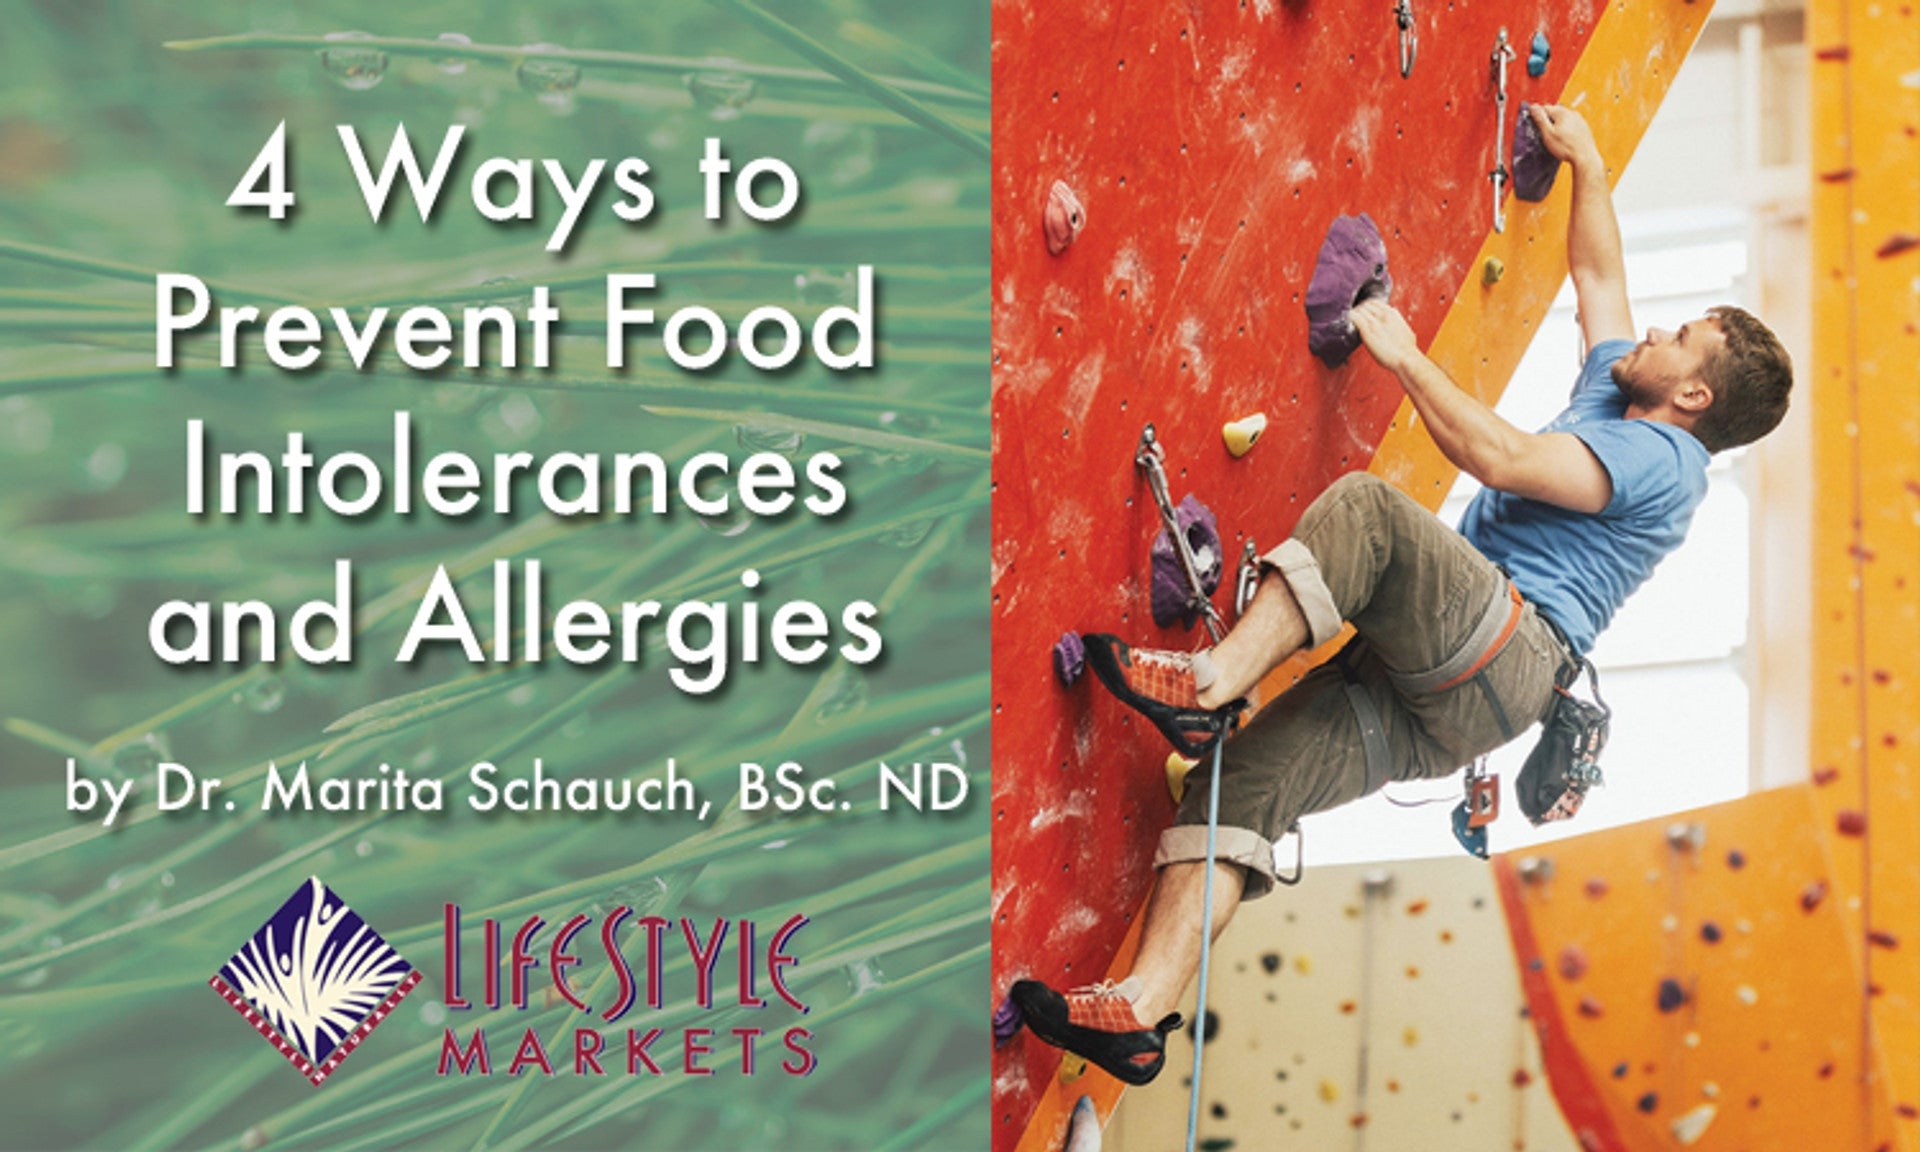 4 Ways to Prevent Food Intolerances and Allergies